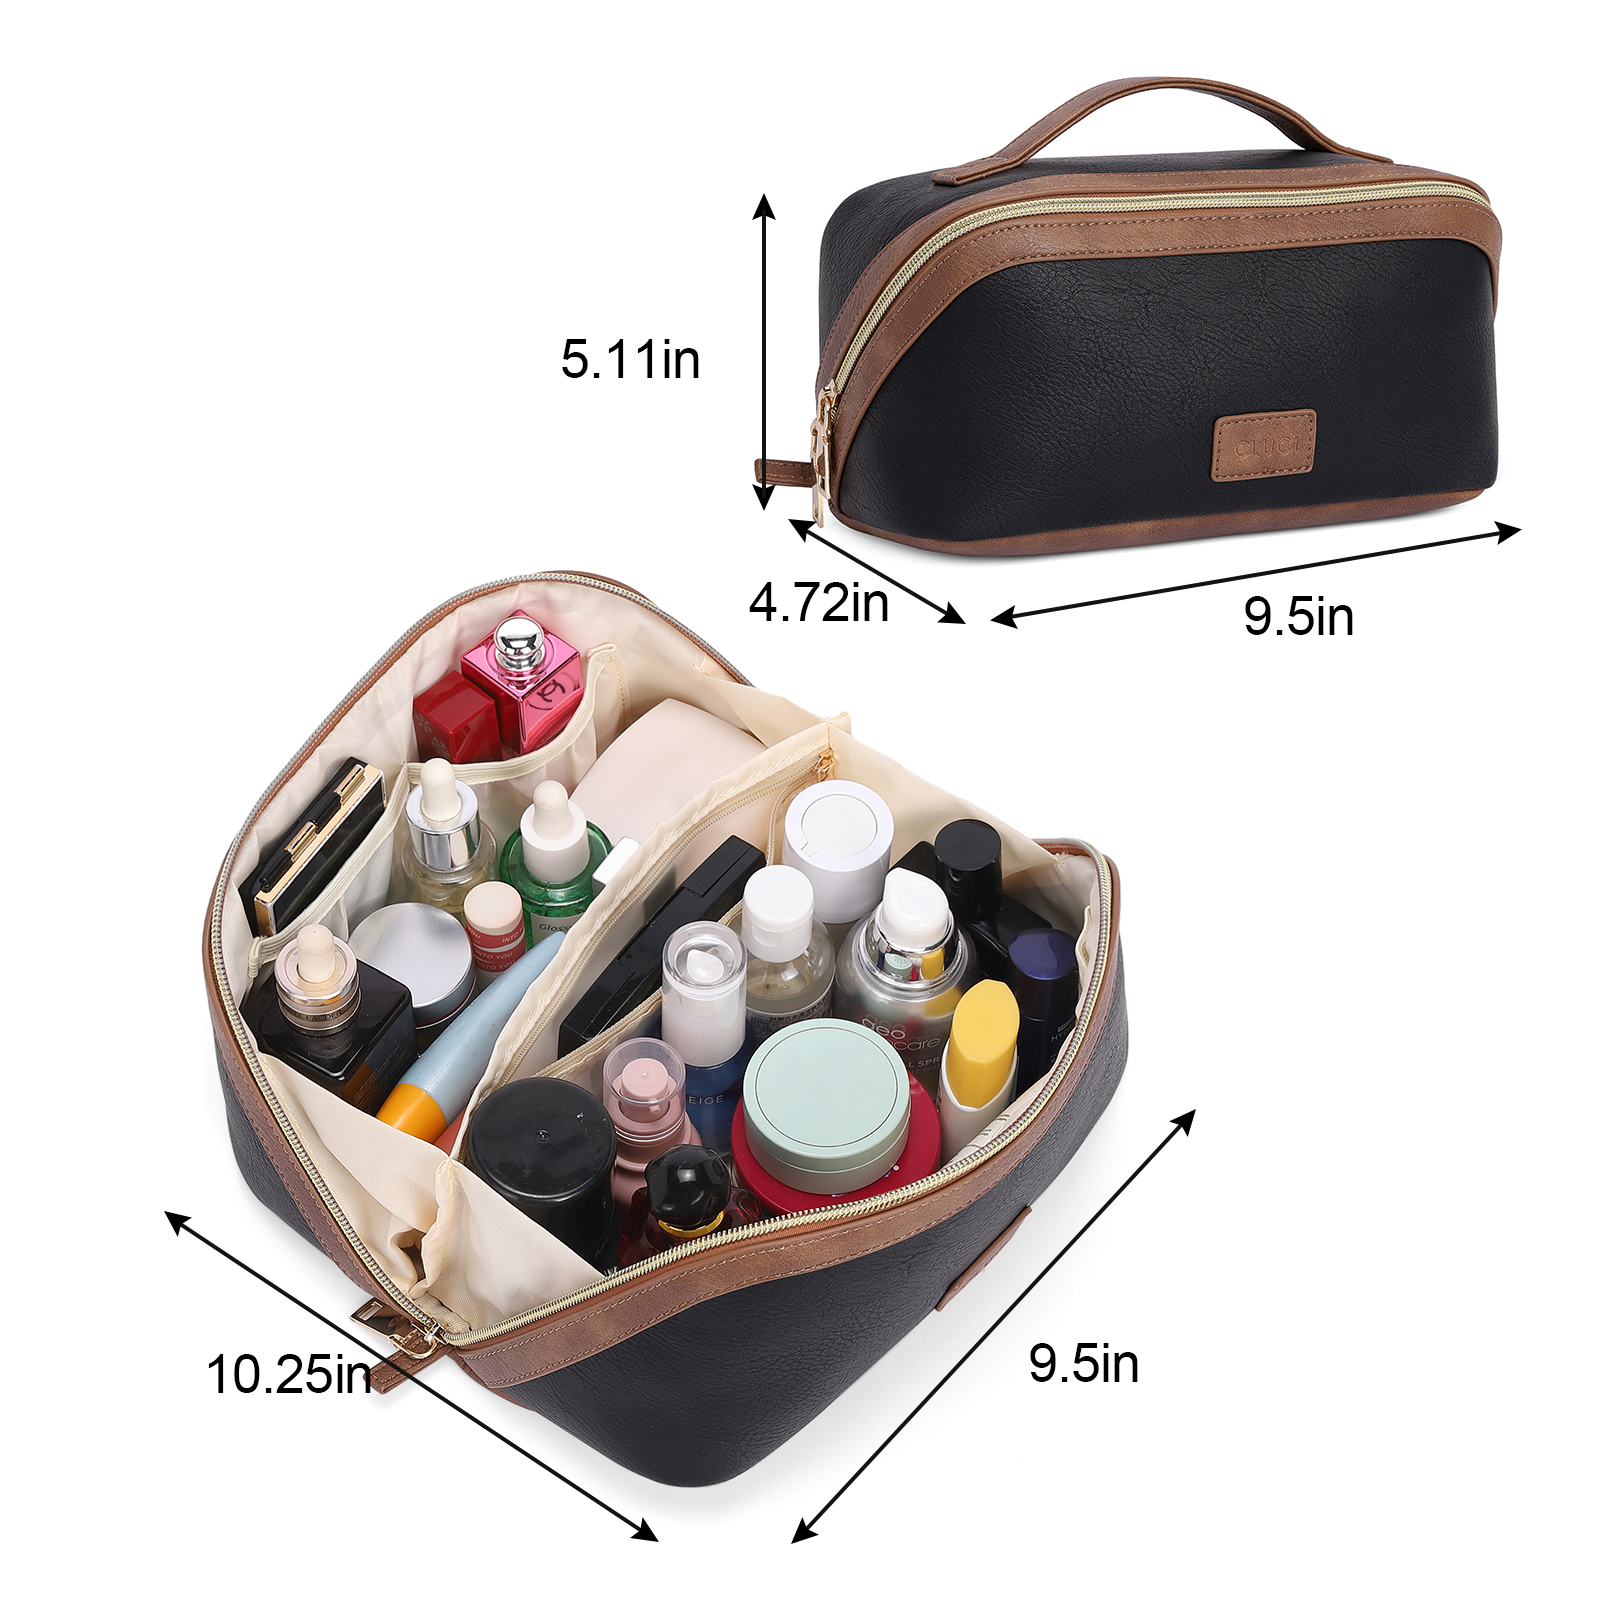 CLUCI Makeup Bag PU Leather Waterproof Large Capacity Cosmetic Bag Organizer Toiletry Bag with Handle and Divider Travel Bag